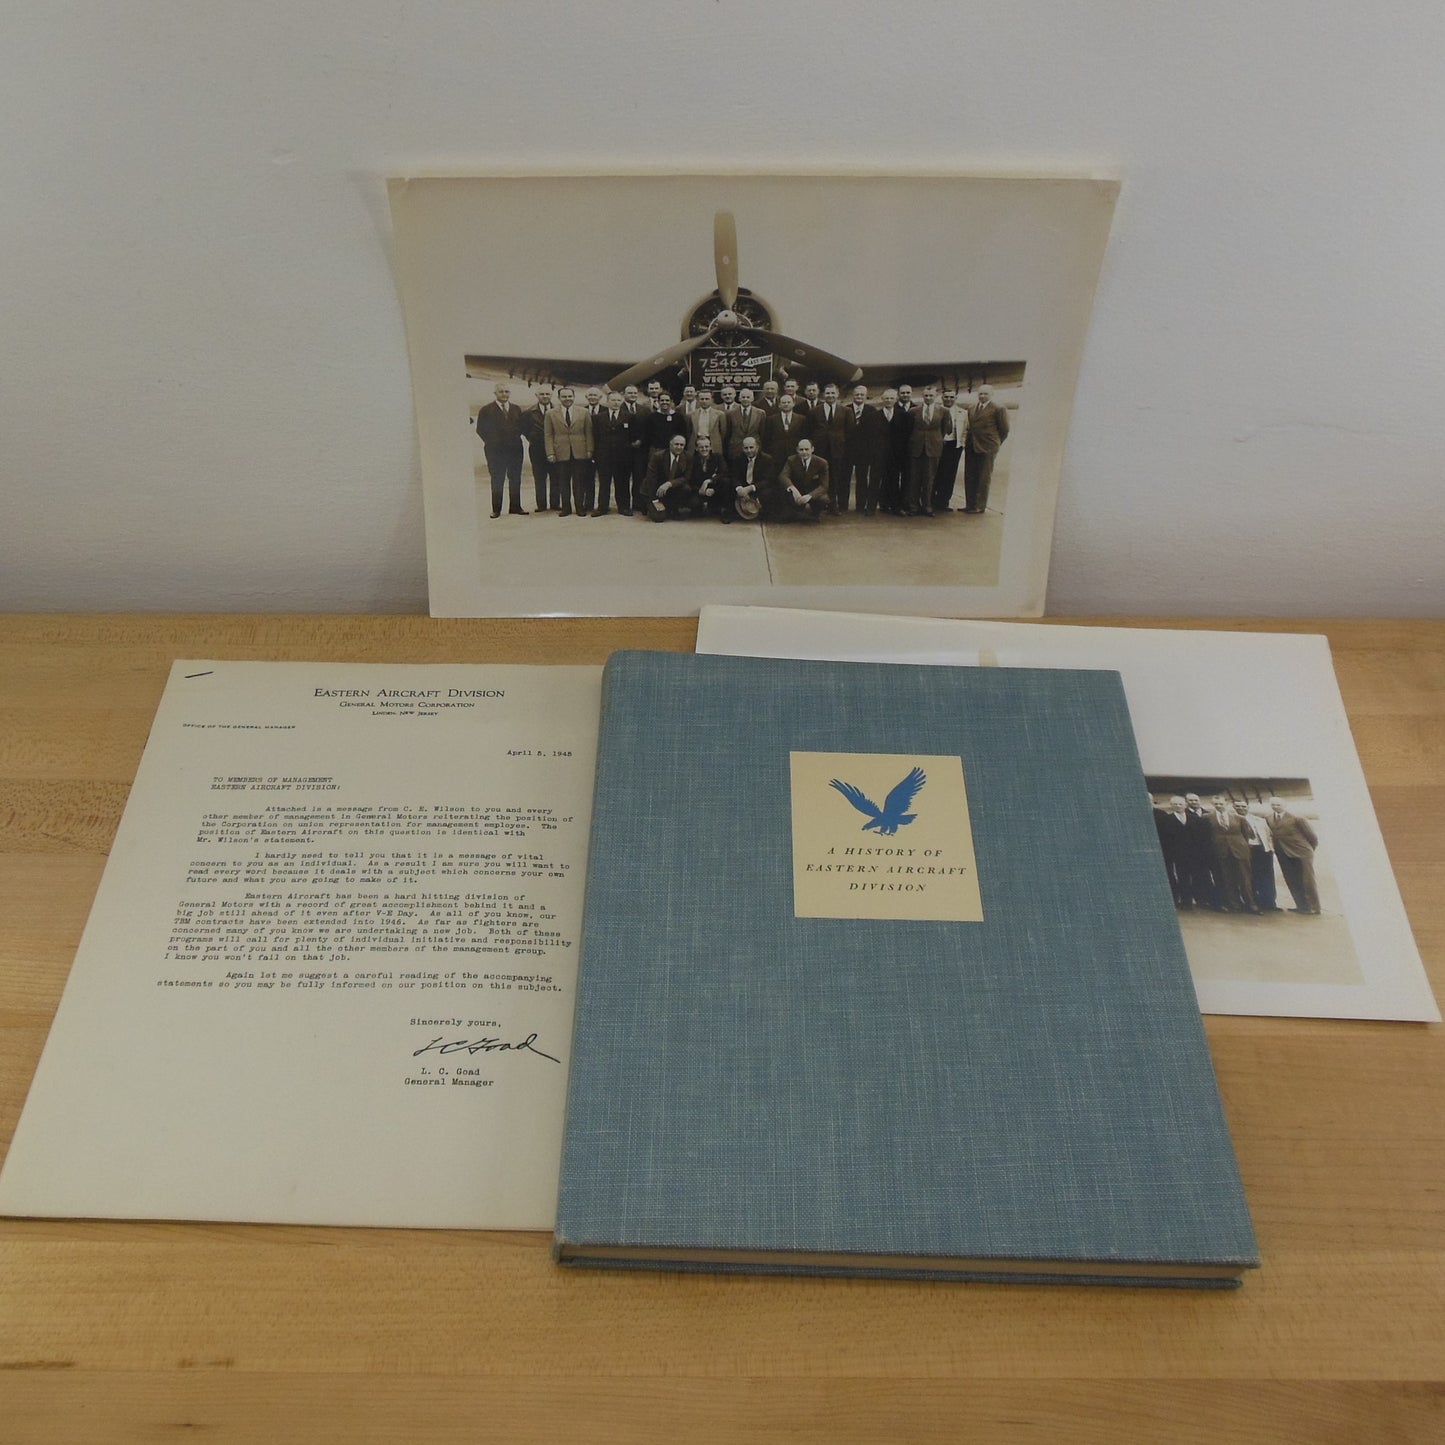 GM WWII 1944 History of Eastern Aircraft Division Book & Photos Union Letters 1945